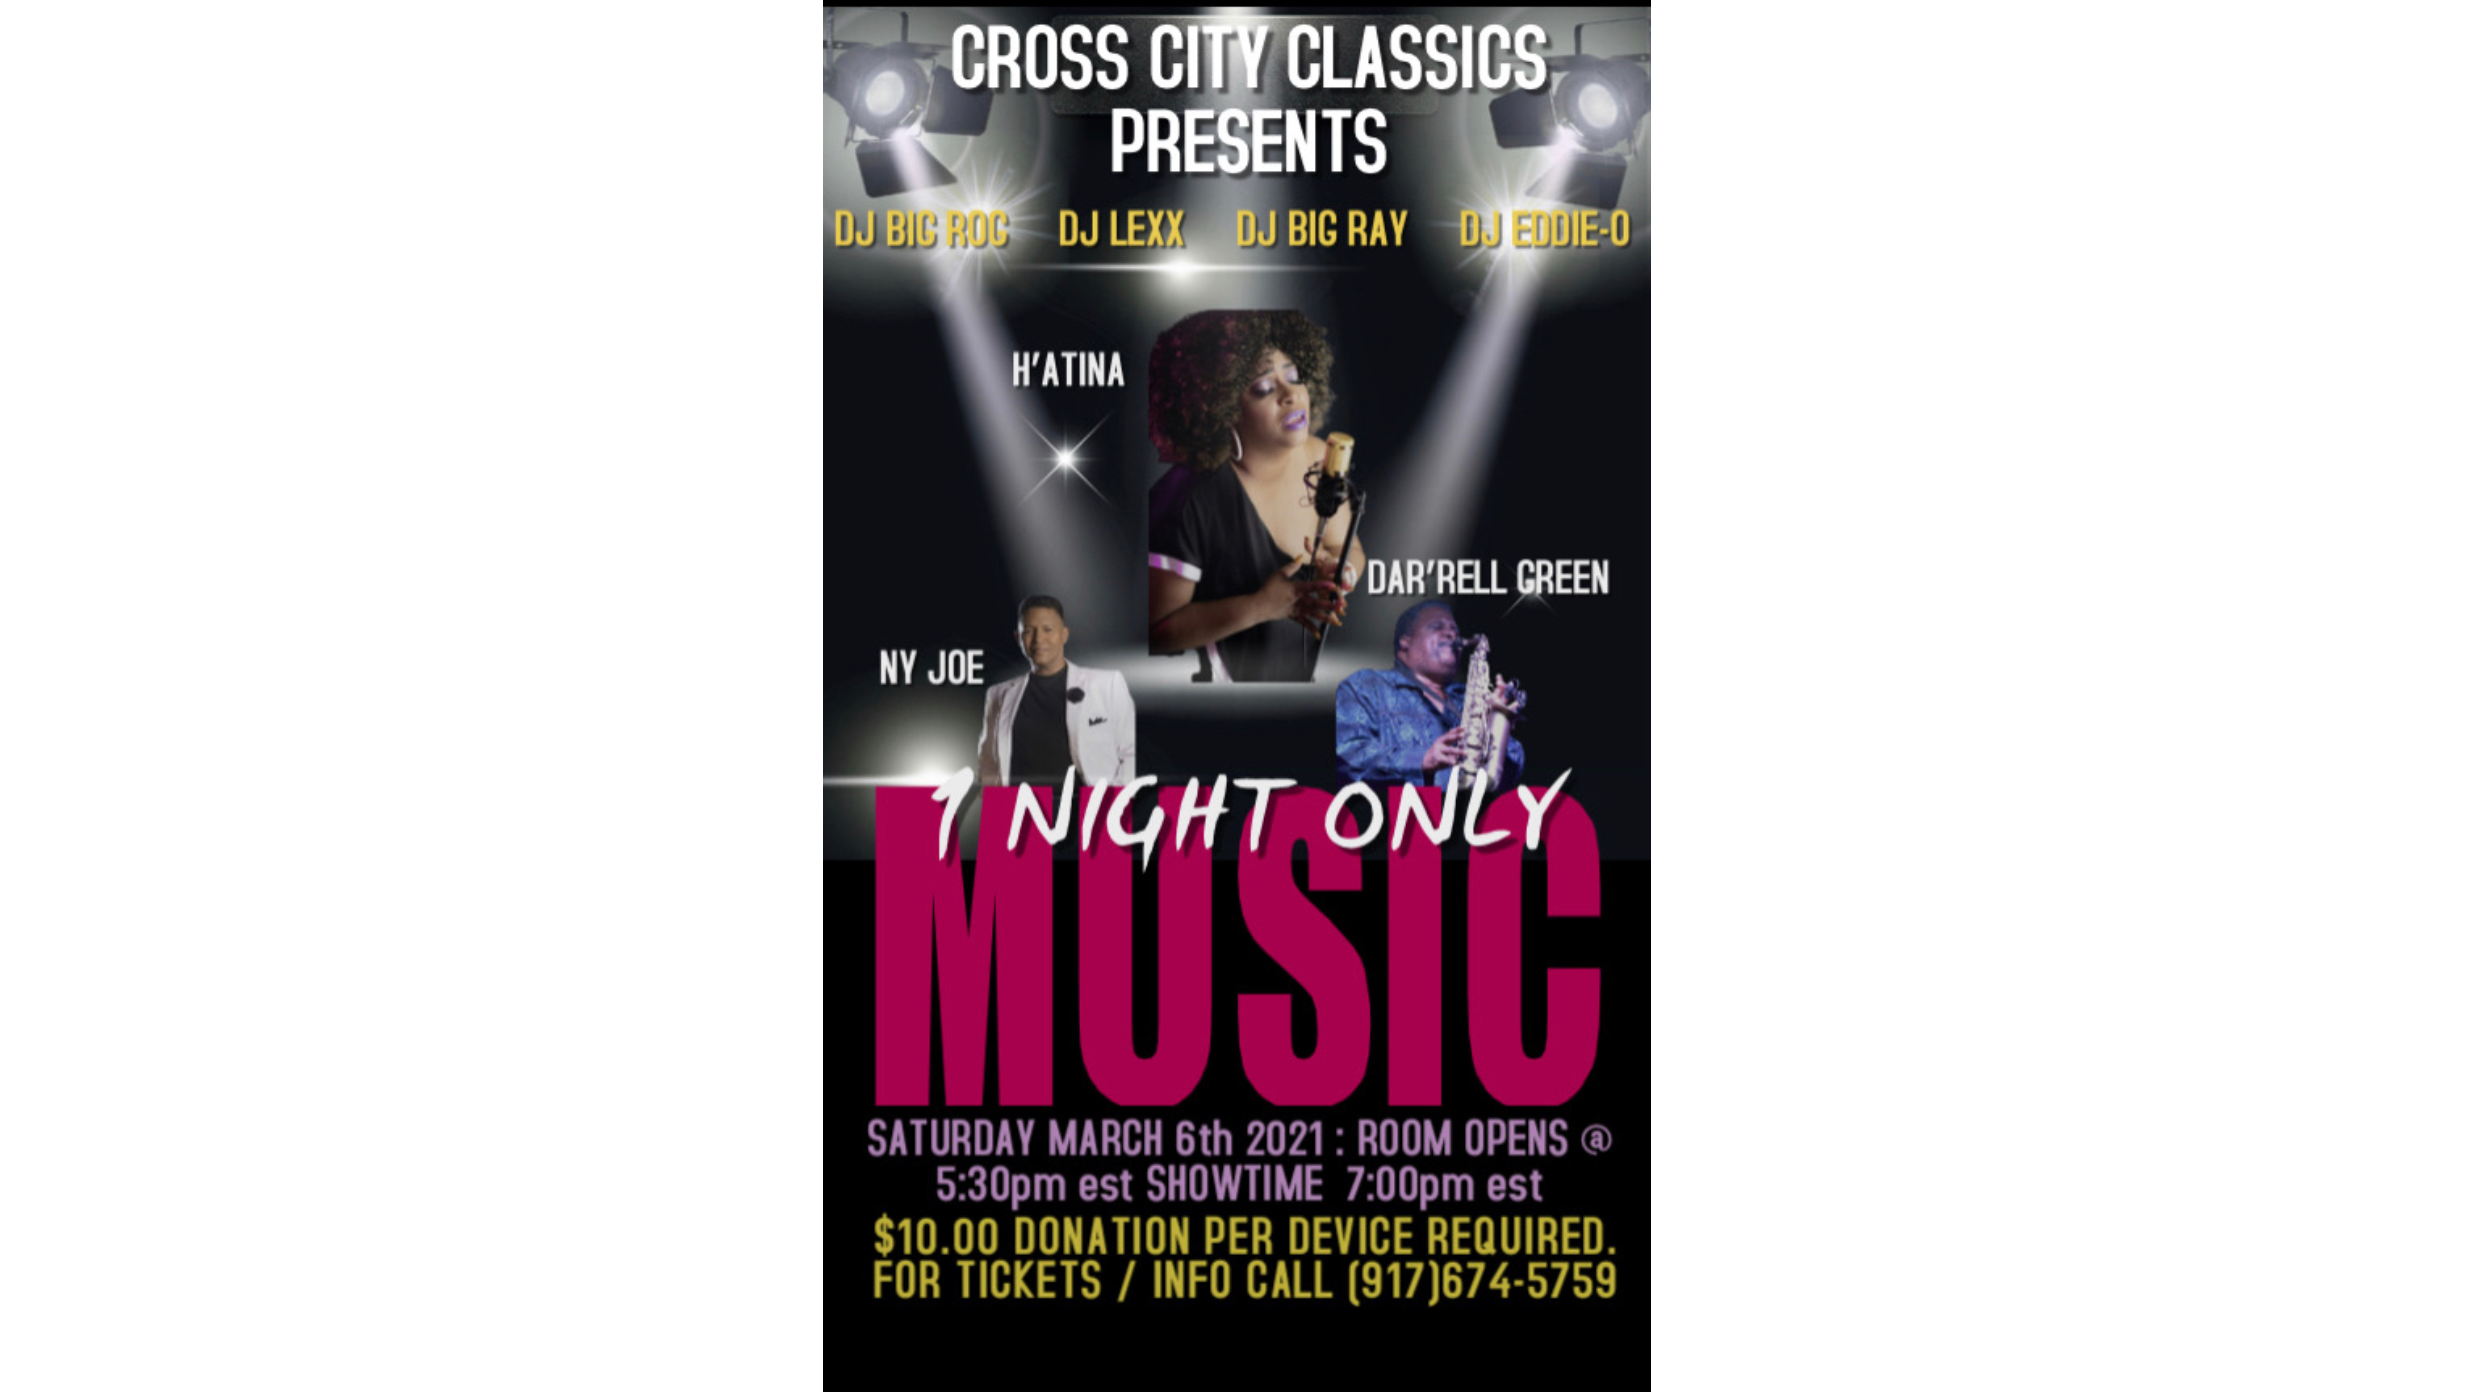 Photo for CROSS CITY CLASSICS - 1 NIGHT ONLY MUSIC CONCERT on ViewStub